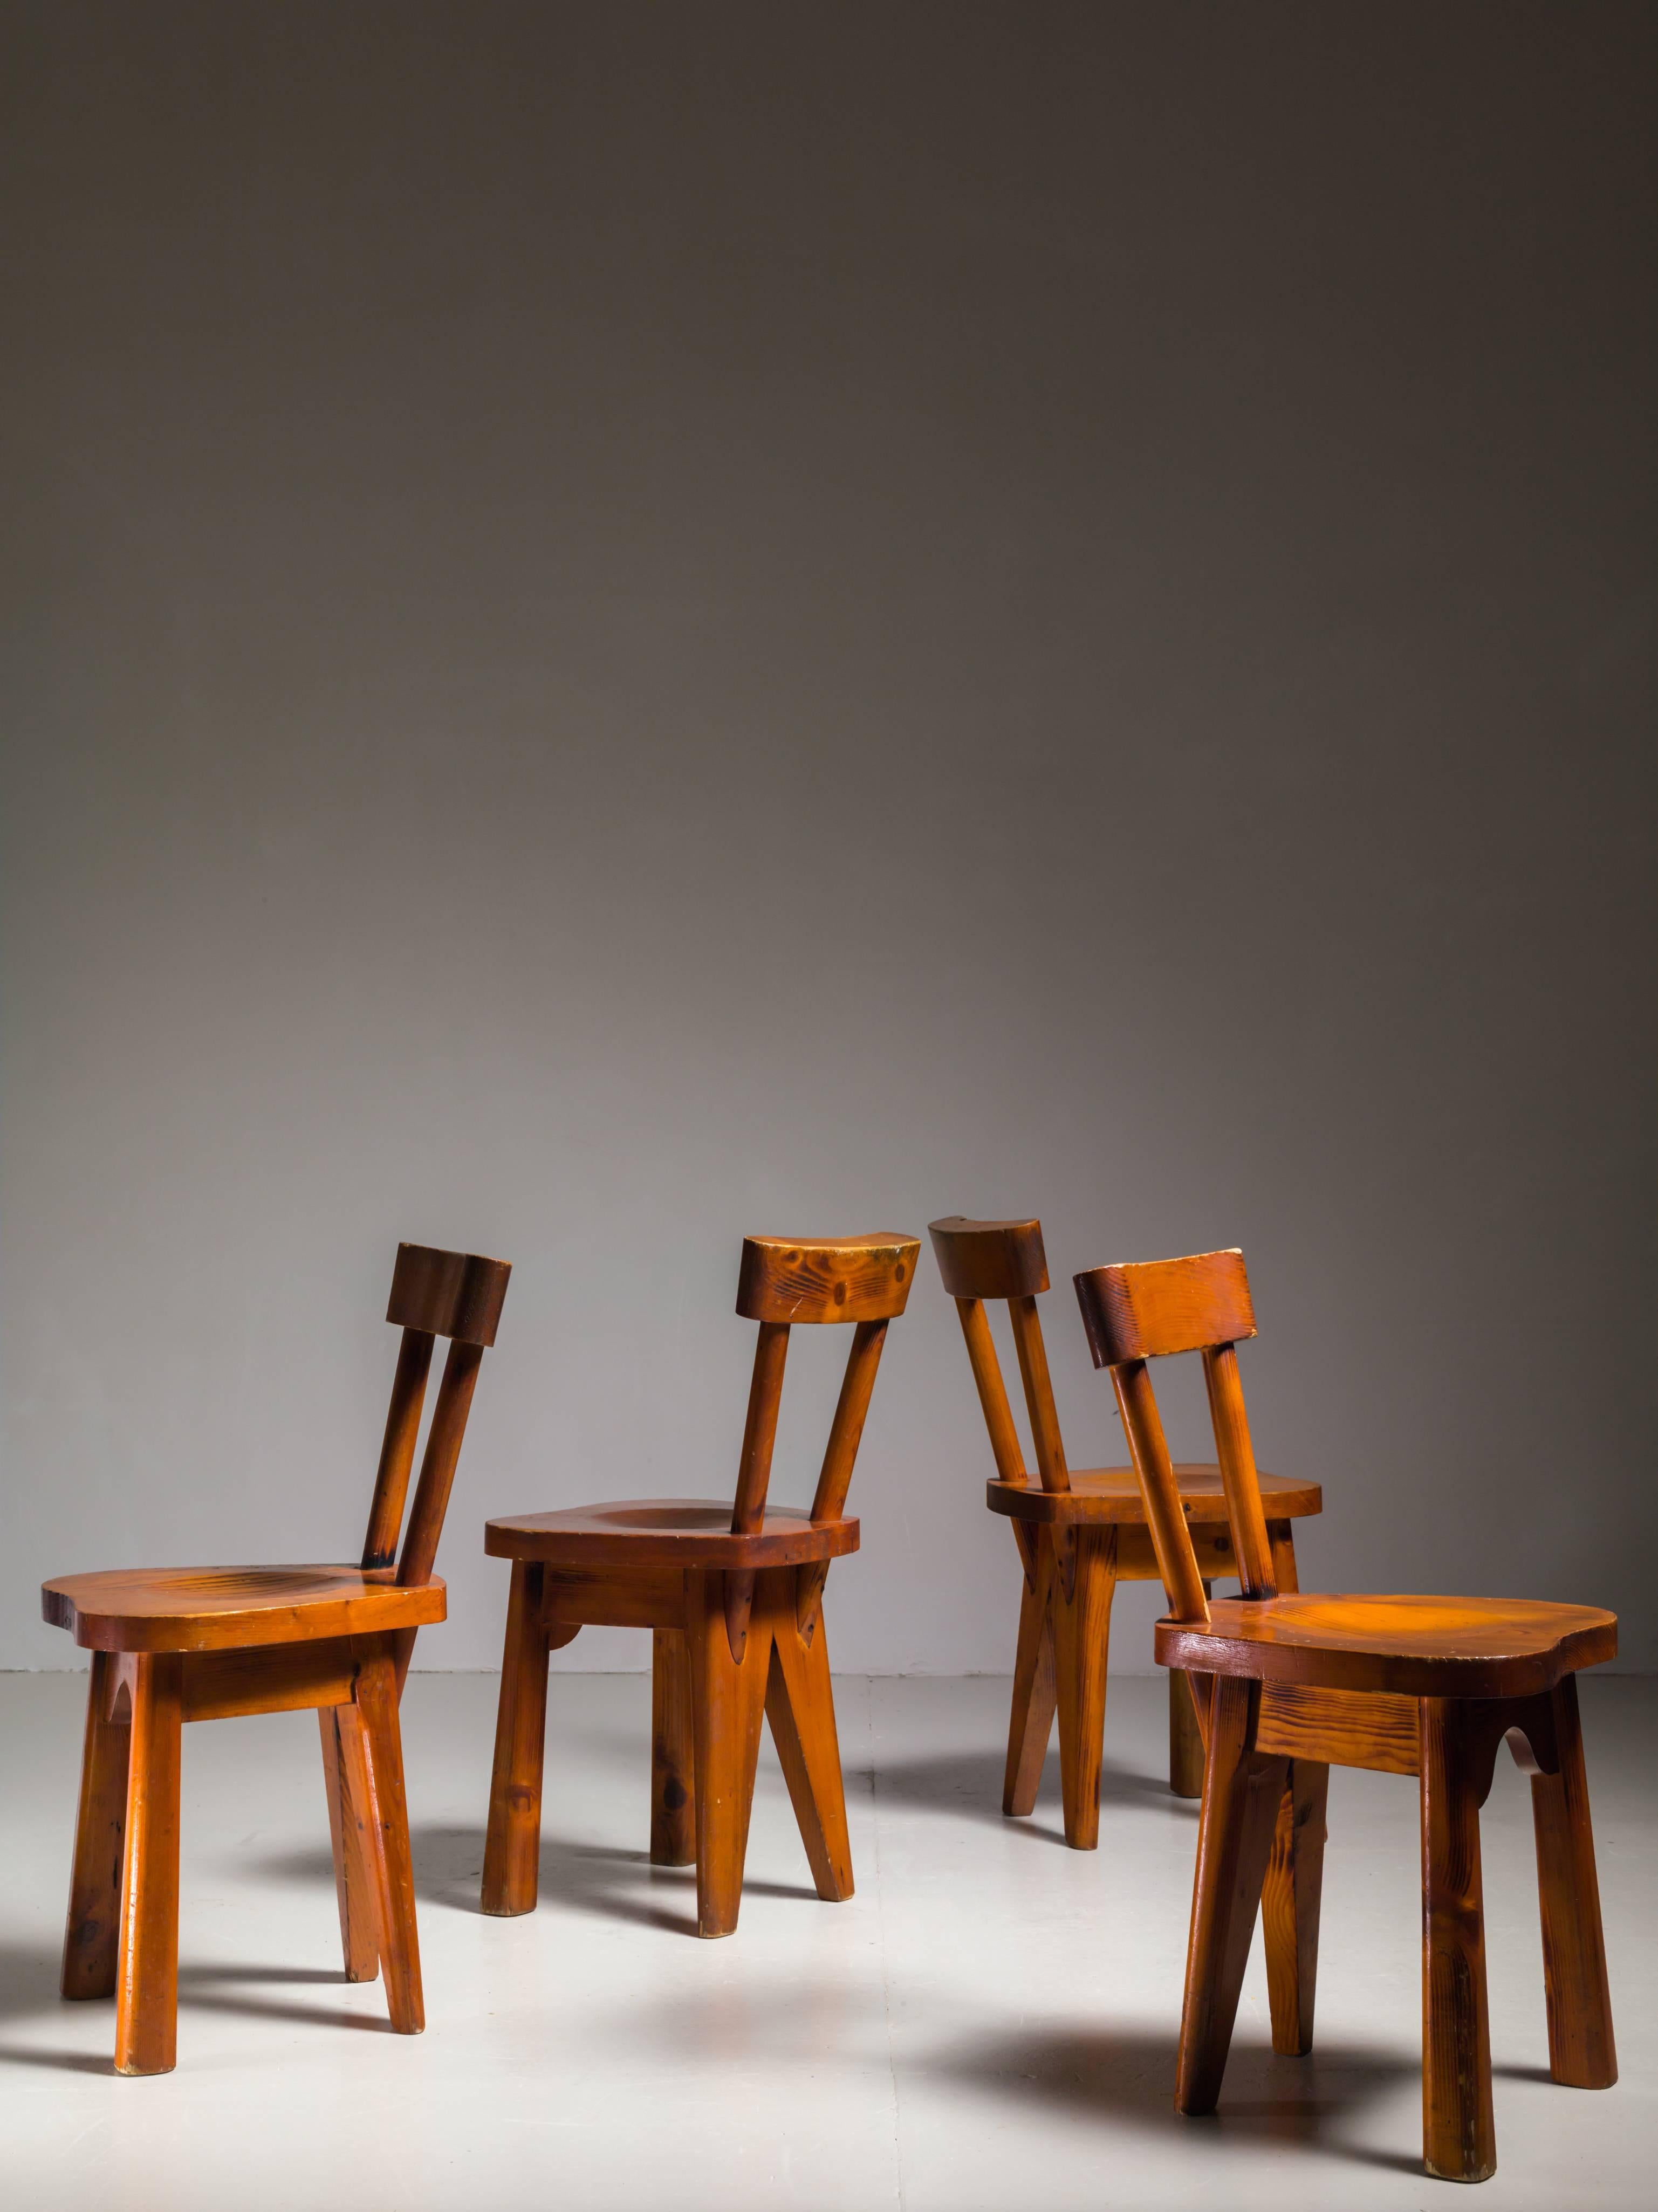 A set of four dining chairs by French architect René Faublee (1906 - 1991), in the Campagne style known from designers like Charlotte Perriand and Pierre Chapo. They are made of a thick, old pine with rounded front legs and tapering back legs.
The